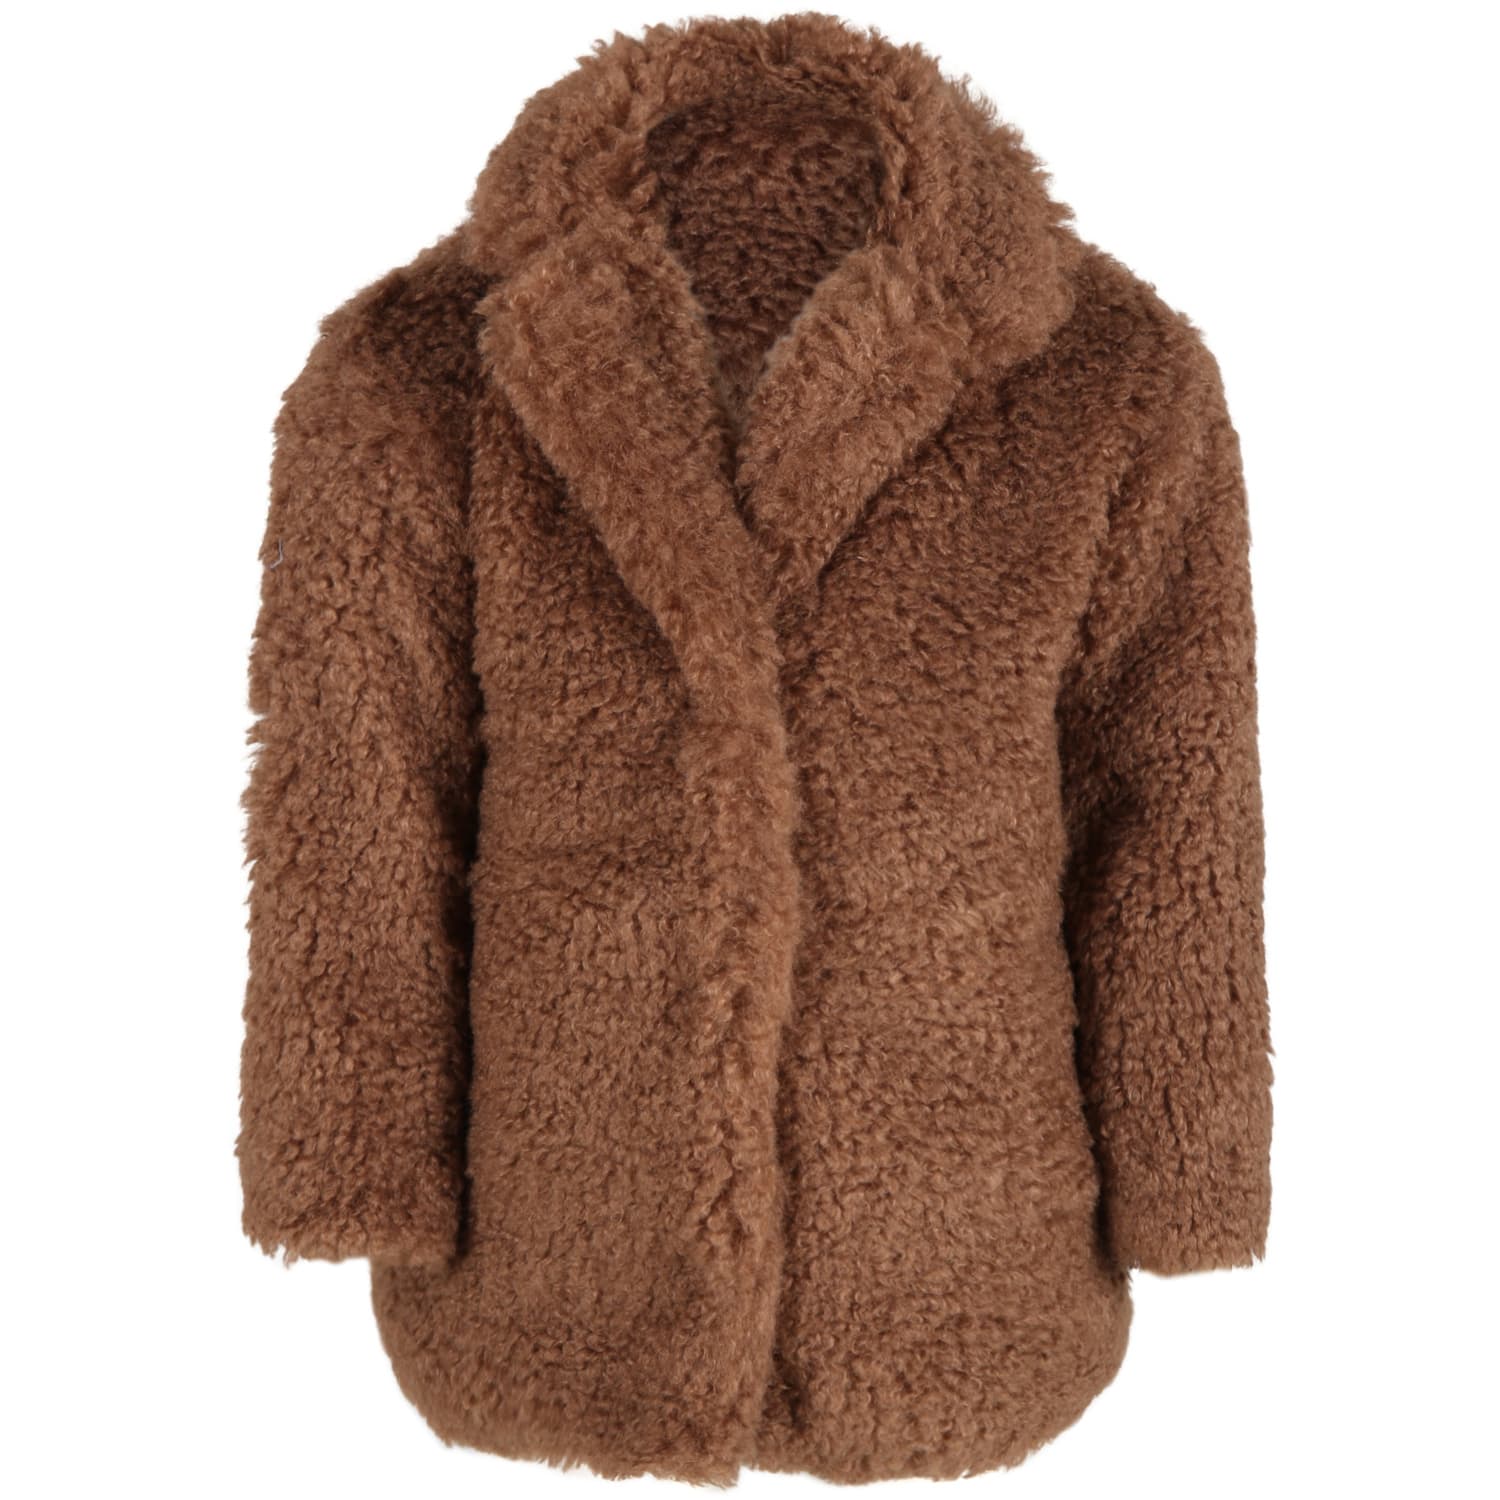 Molo Brown Coat For Kids